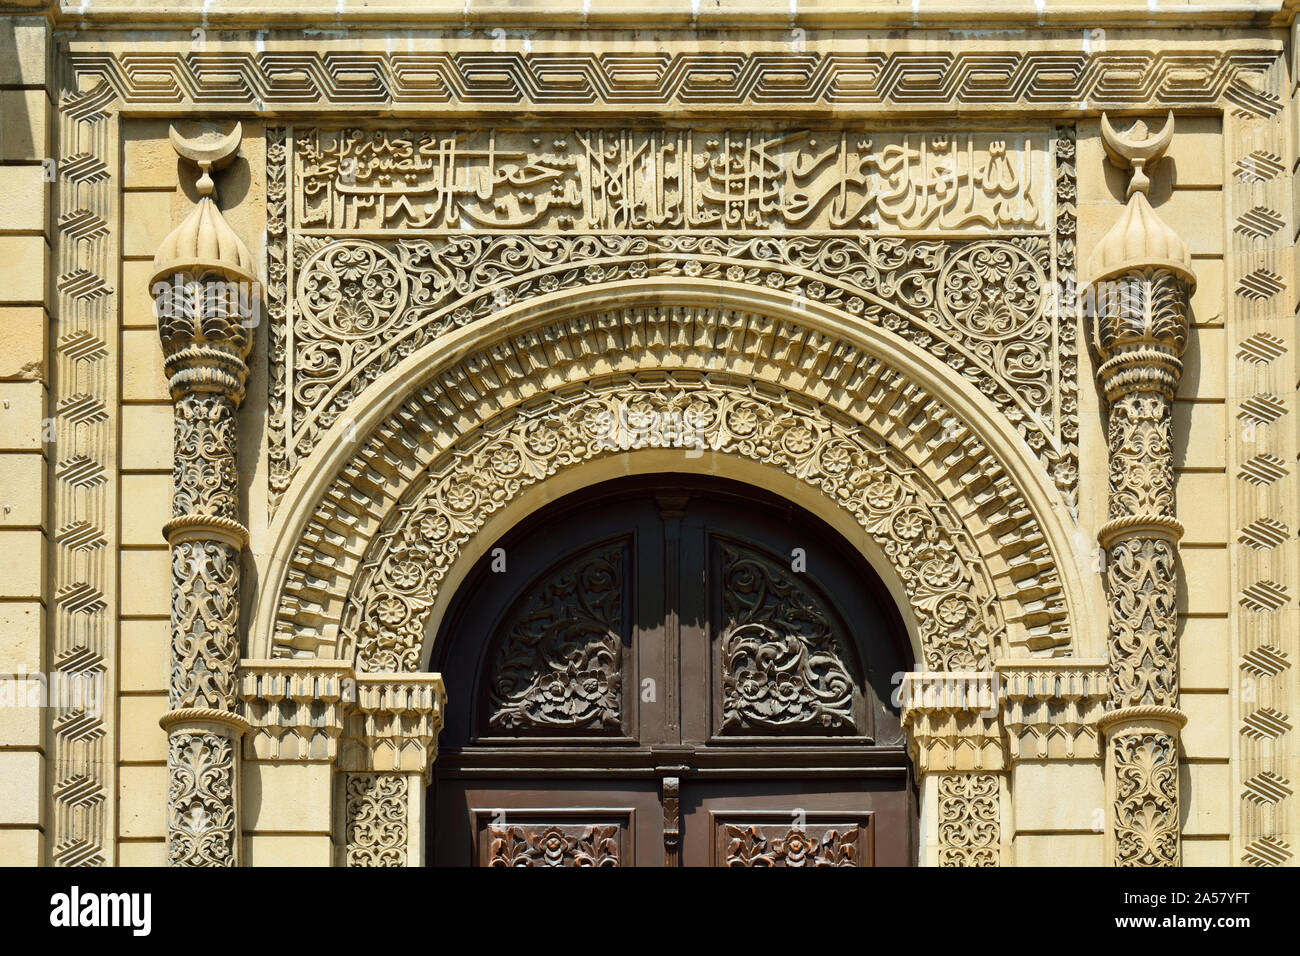 Detail of the entrance of Juma Mosque (Cuma mosque) or Friday Mosque, a Shia mosque in Baku, Azerbaijan. It was built in the 12th century. Stock Photo